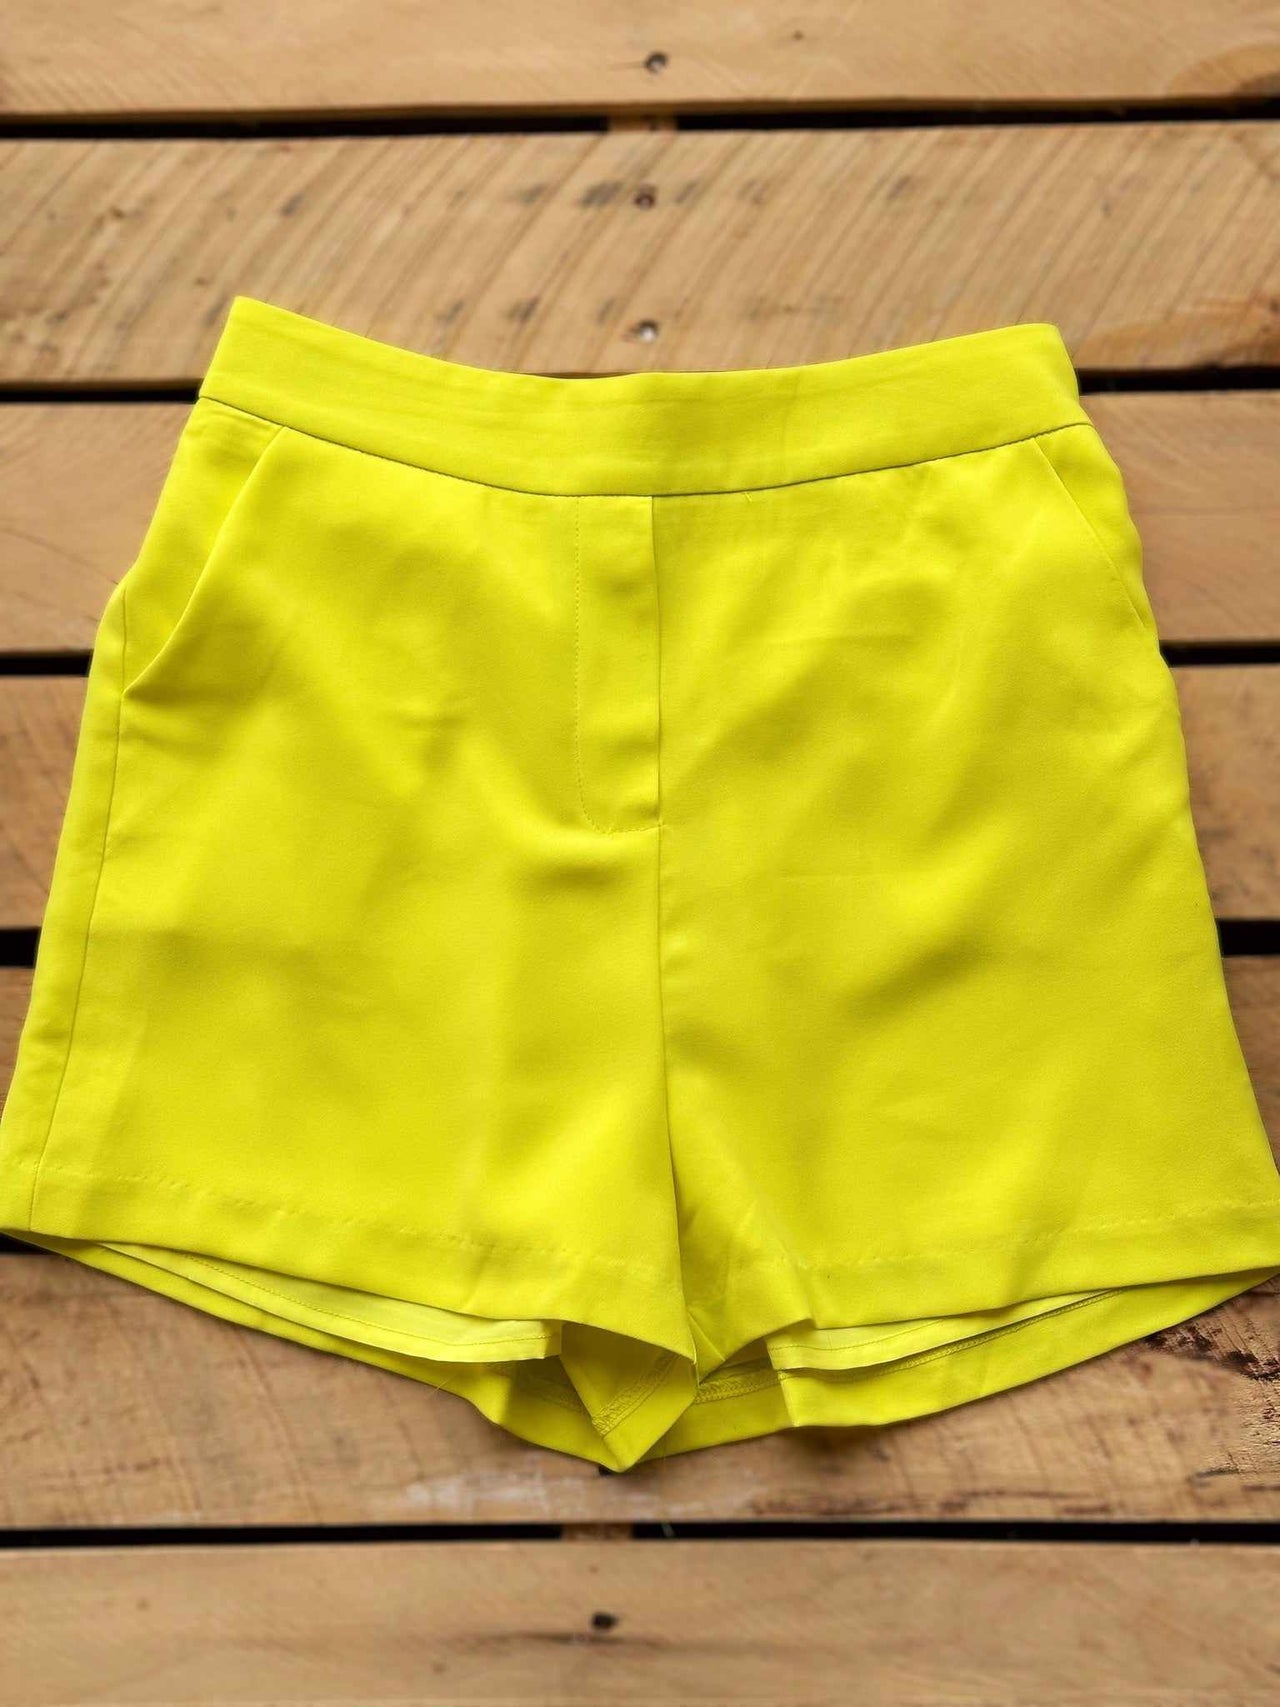 Yellow tailored flat front shorts.